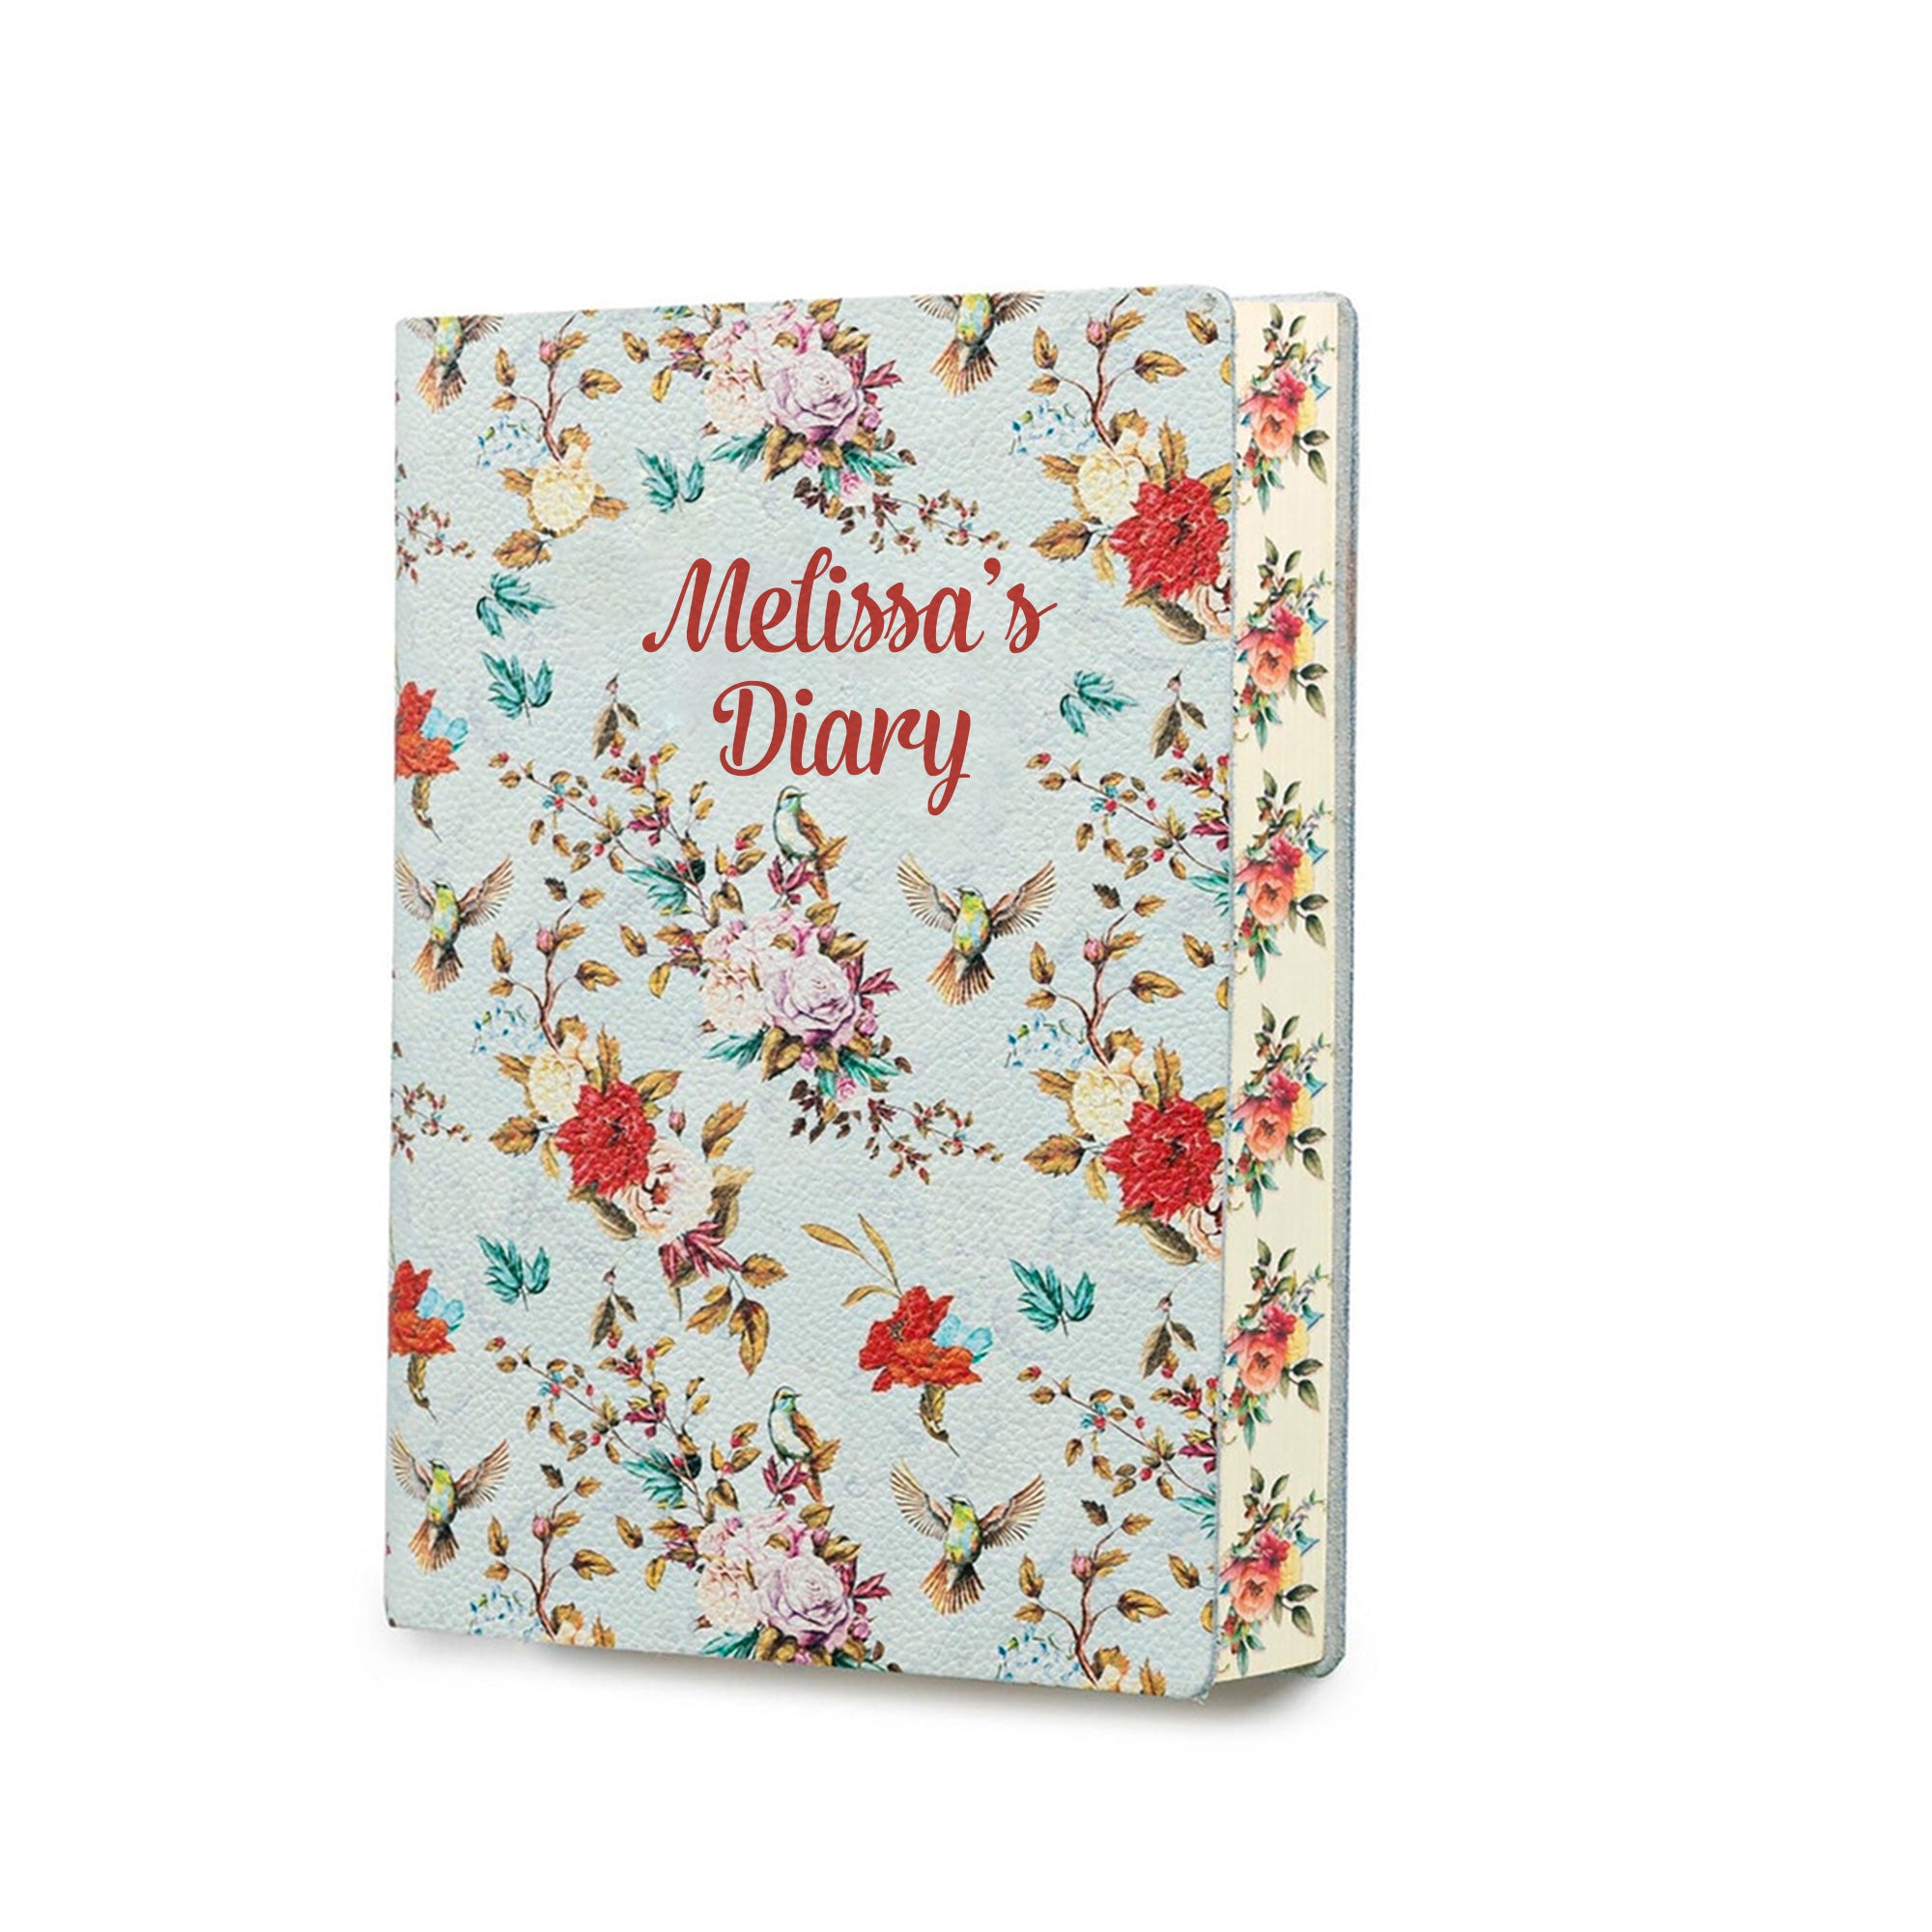 My Diary With Nightingale Uccelli (Birds) Floral Leather Journal - Gift For Fiends, Family Members